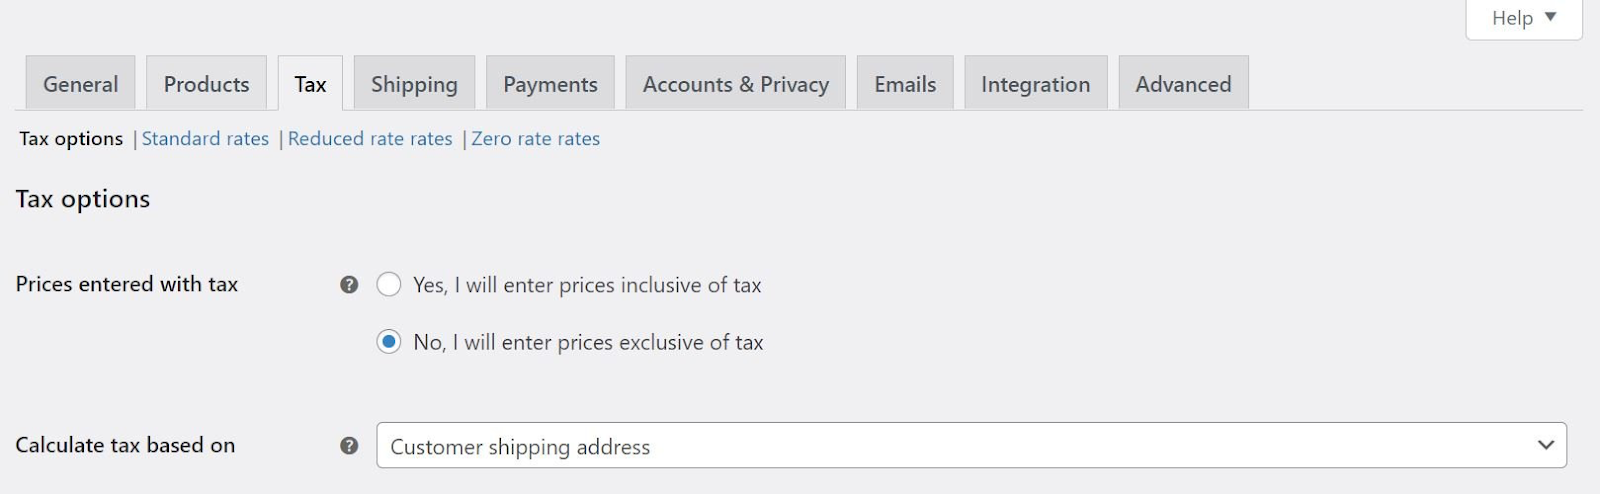 tax options in woocommerce